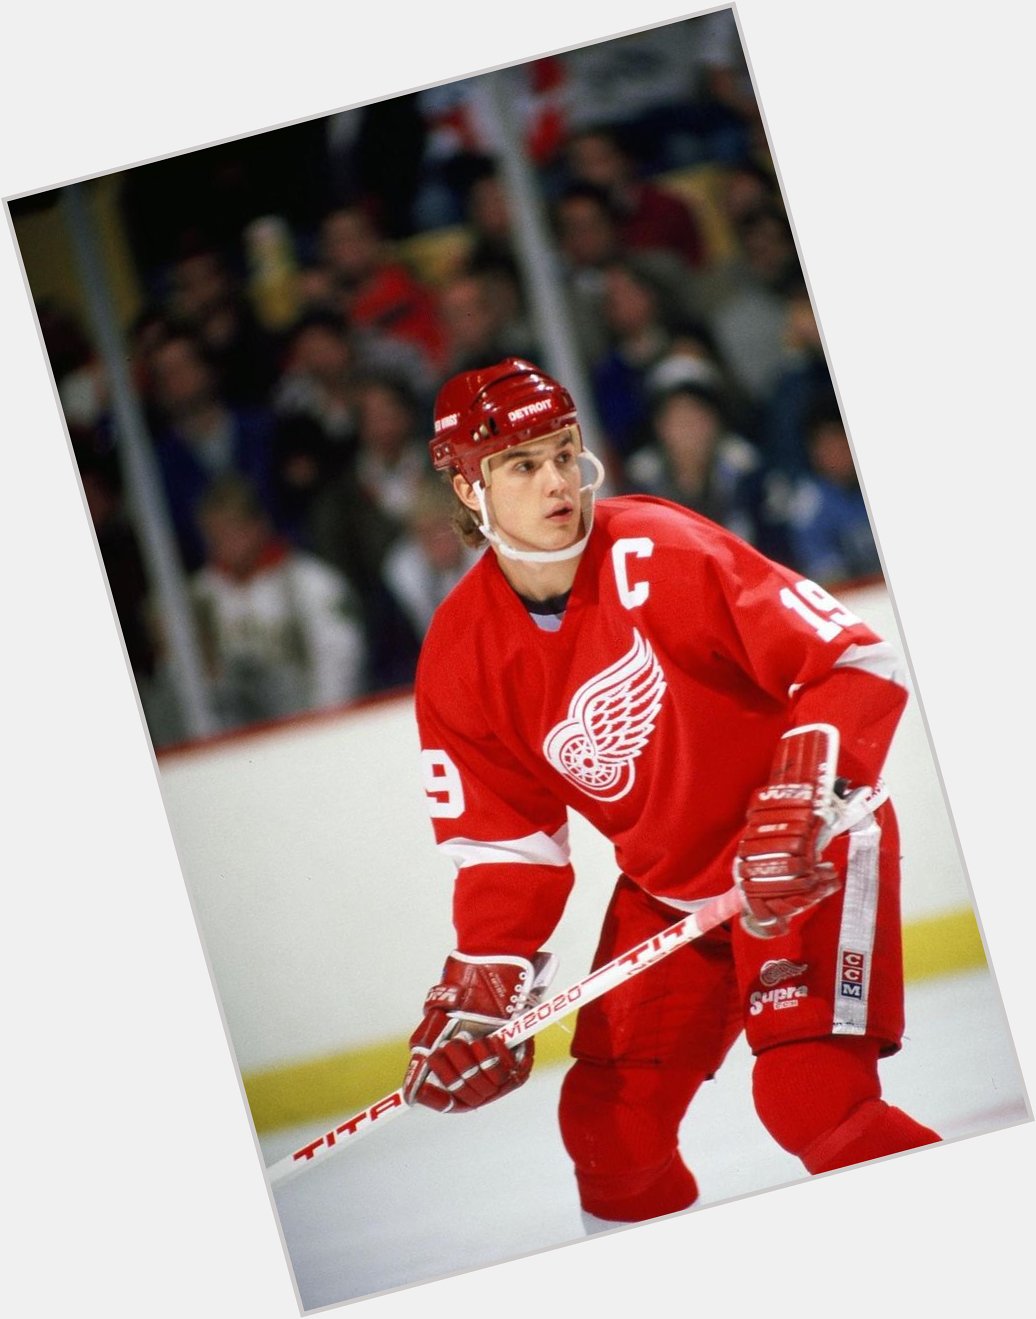 Happy 55th birthday to the 1983 NHL entry draft s 4th overall pick, The Captain, Steve Yzerman 